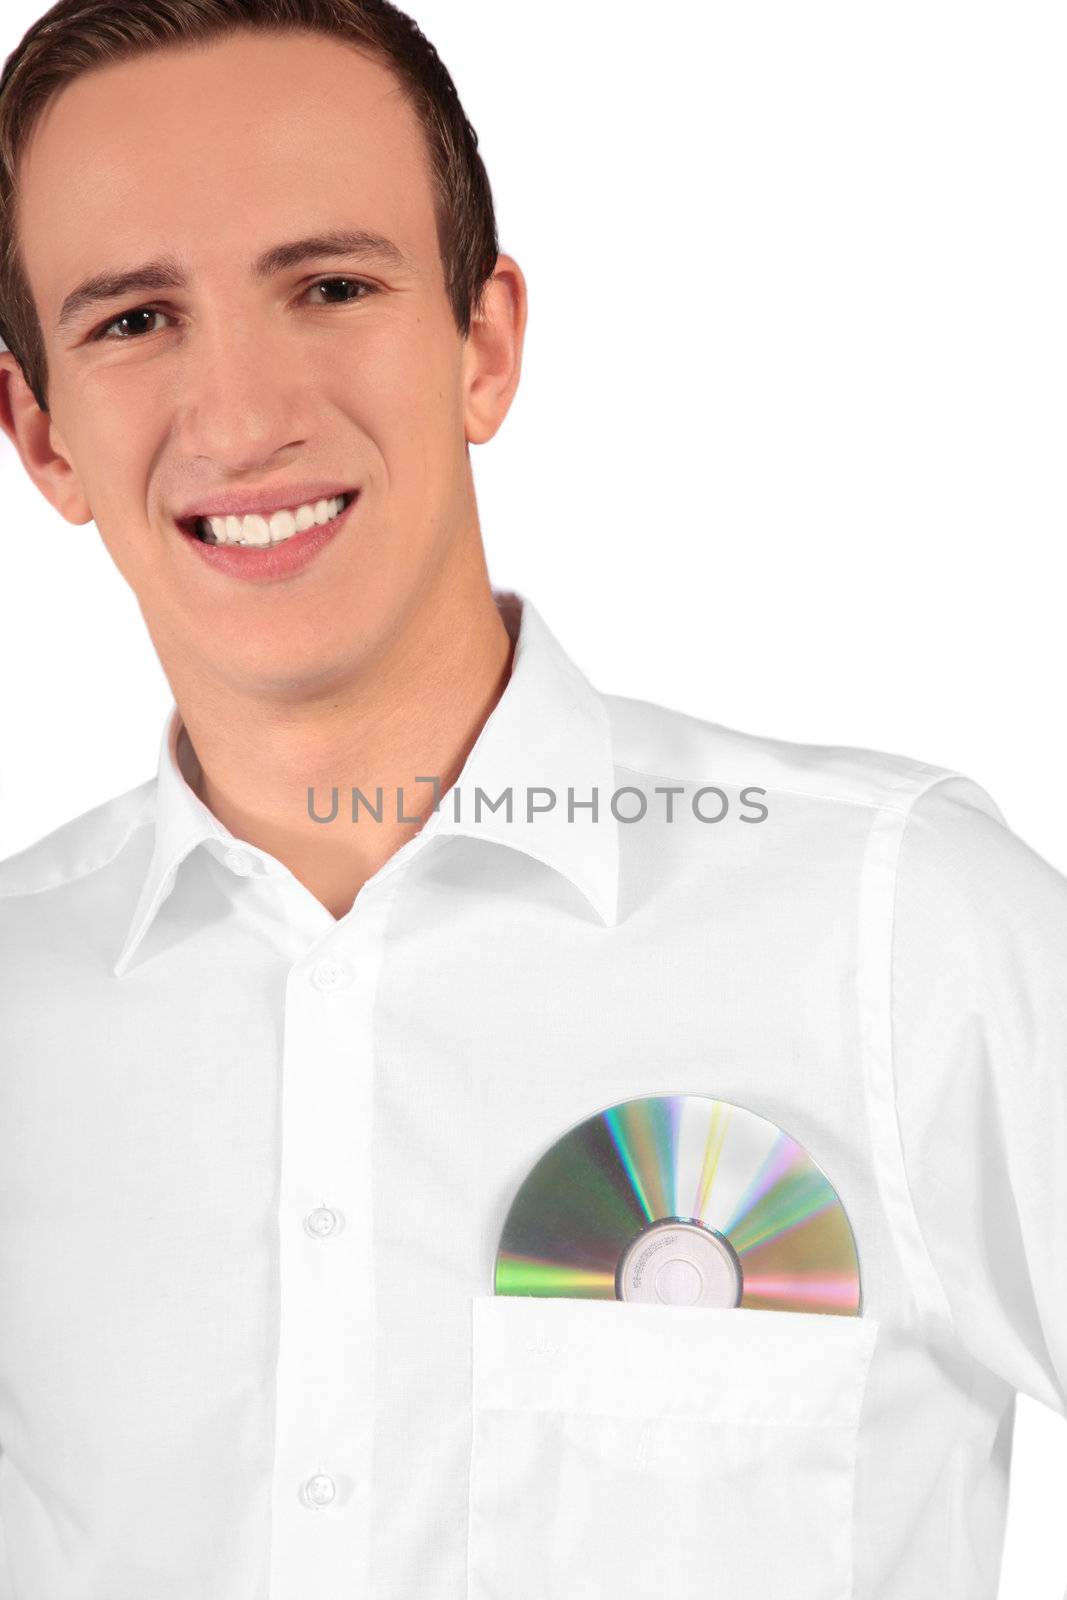 A young software specialist carrying a cd or dvd in his shirt pocket. All on white background.